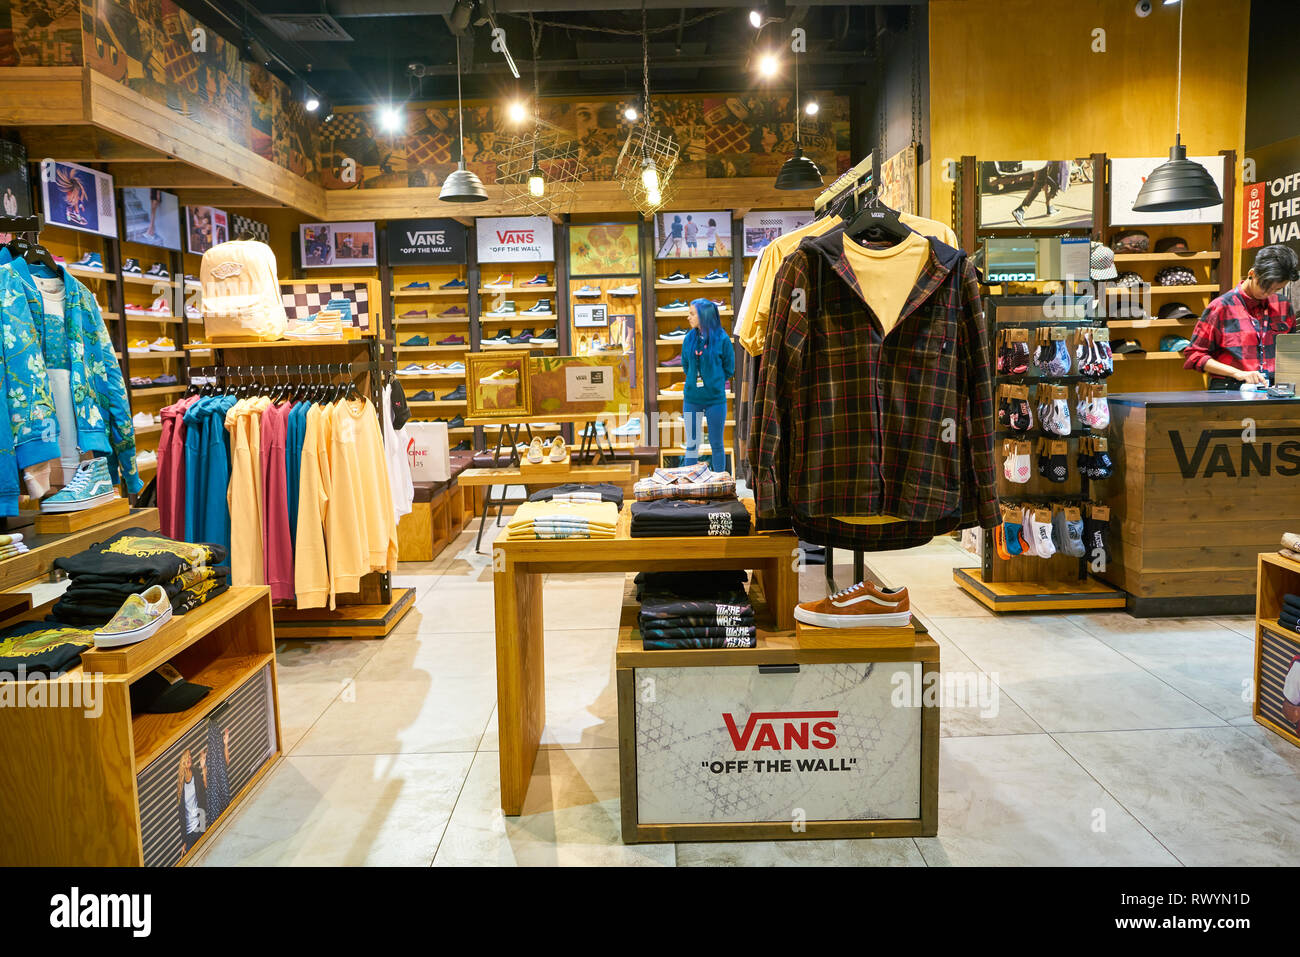 Vans Shop High Resolution Stock Photography and -